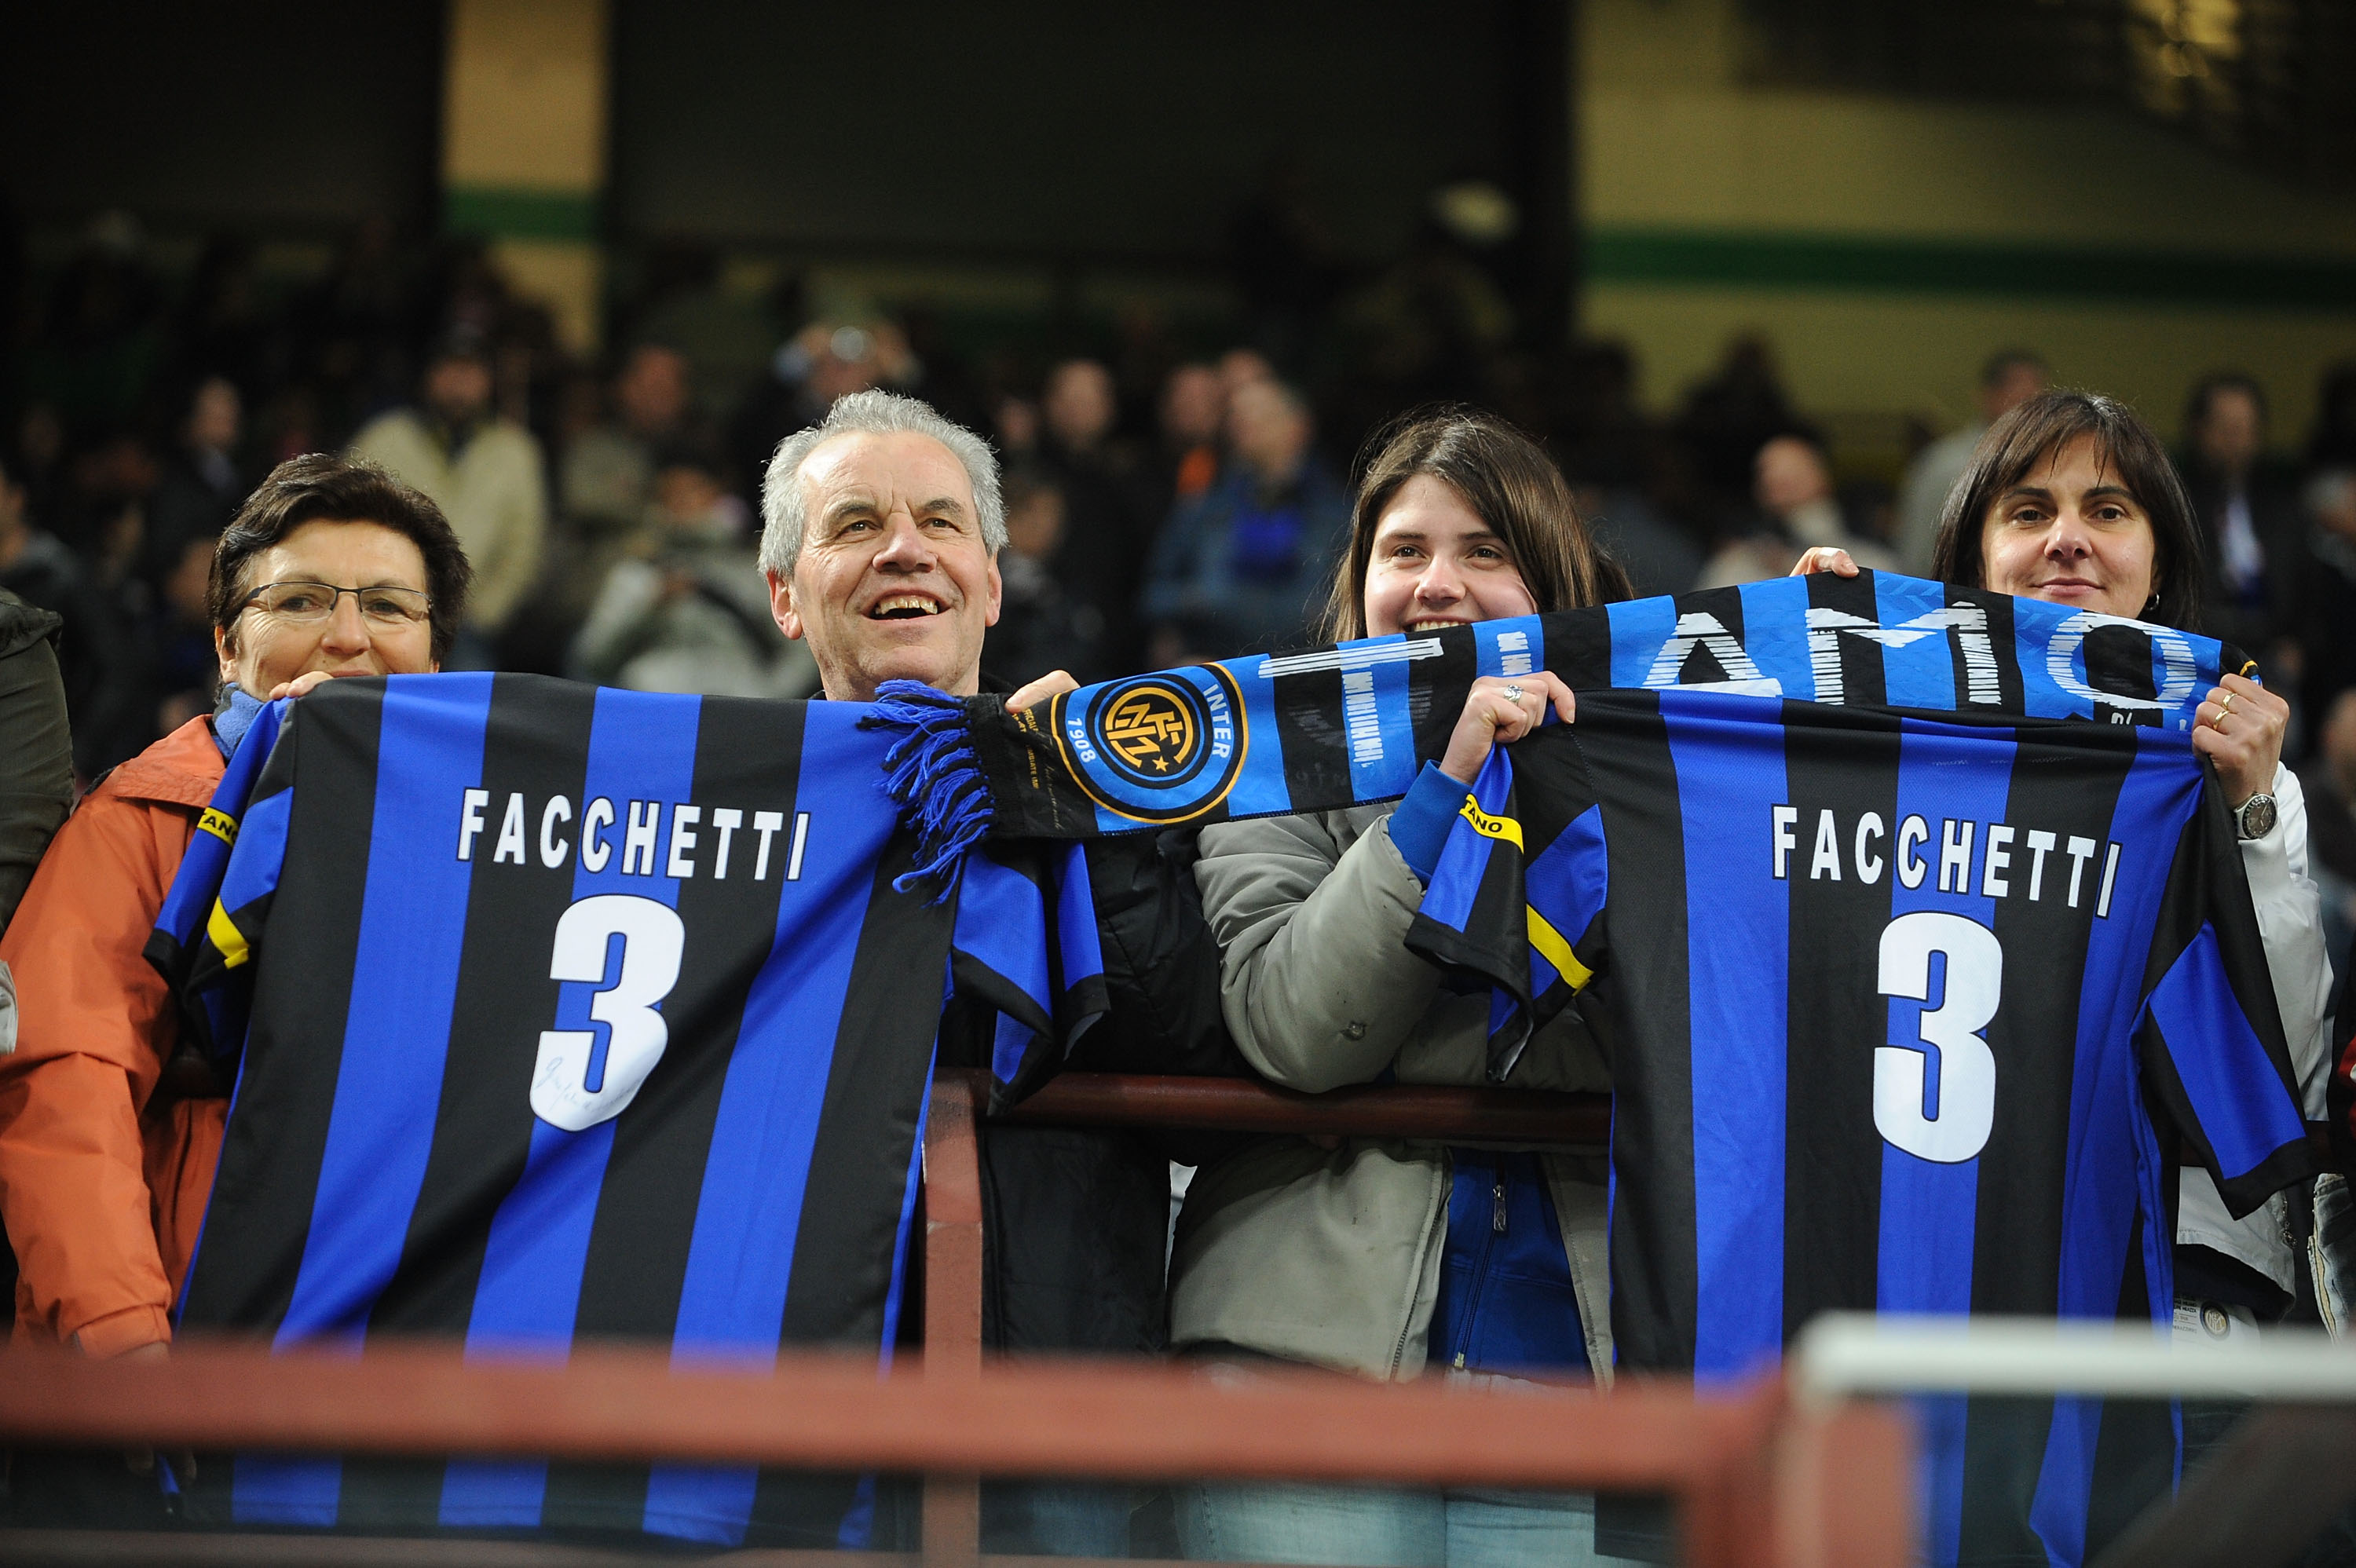 MILAN, ITALY - APRIL 16: Fans of FC Internazionale MIlano hold up shirts of former player Giacinto Facchetti, during the Serie A match between FC Internazionale Milano and Juventus FC at Stadio Giuseppe Meazza on April 16, 2010 in Milan, Italy.  (Photo by